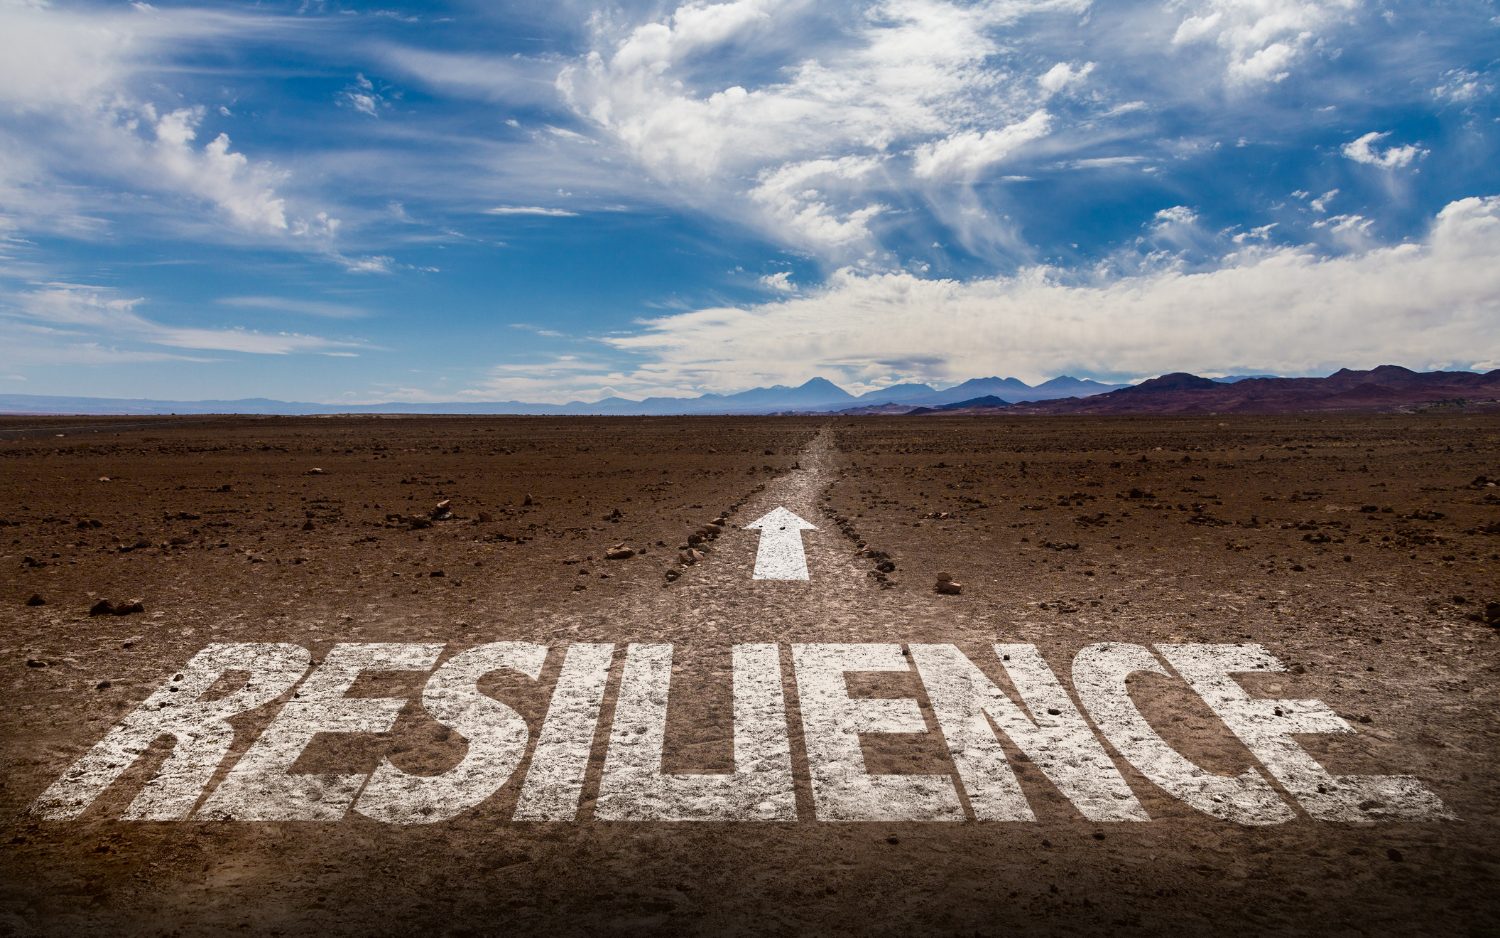 the word resilience superimposed on the ground with and arrow pointing on the path ahead